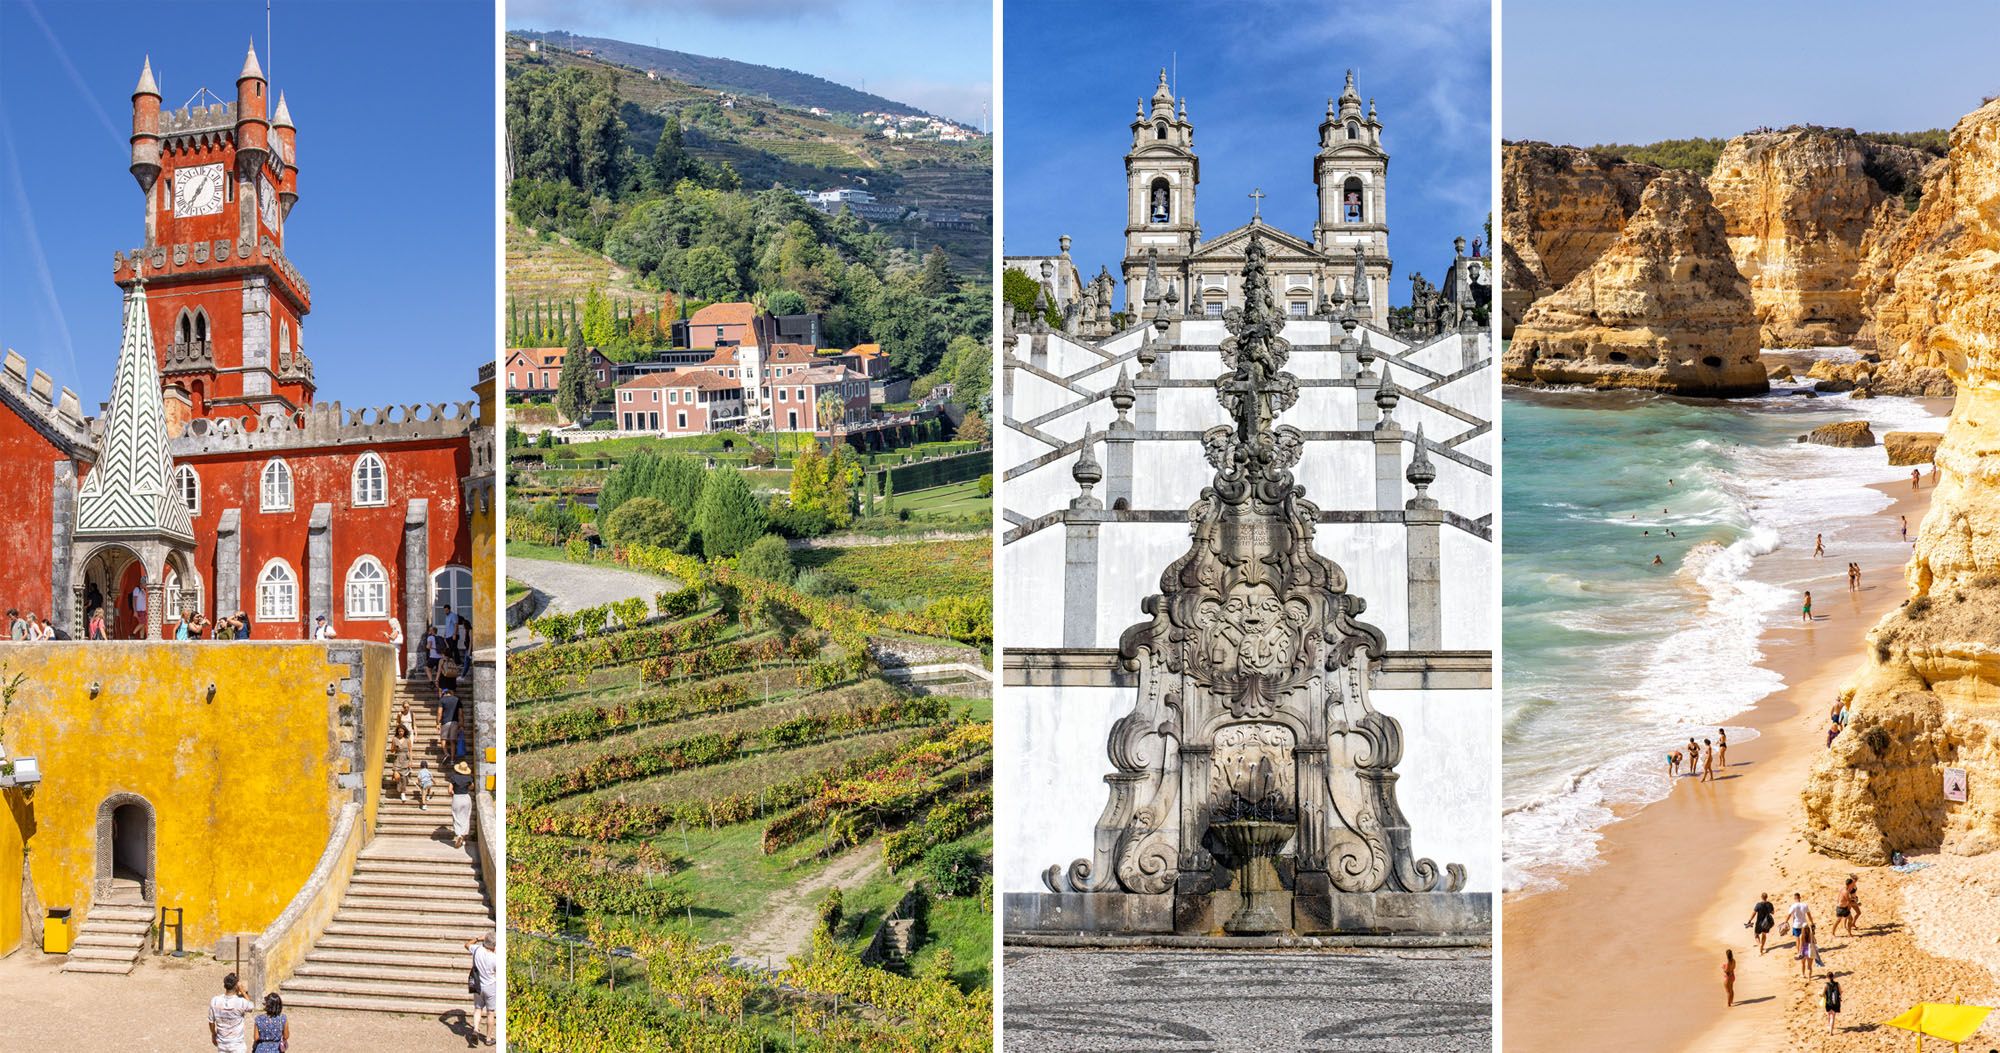 Featured image for “Portugal Bucket List: 25 Best Things to Do in Portugal”